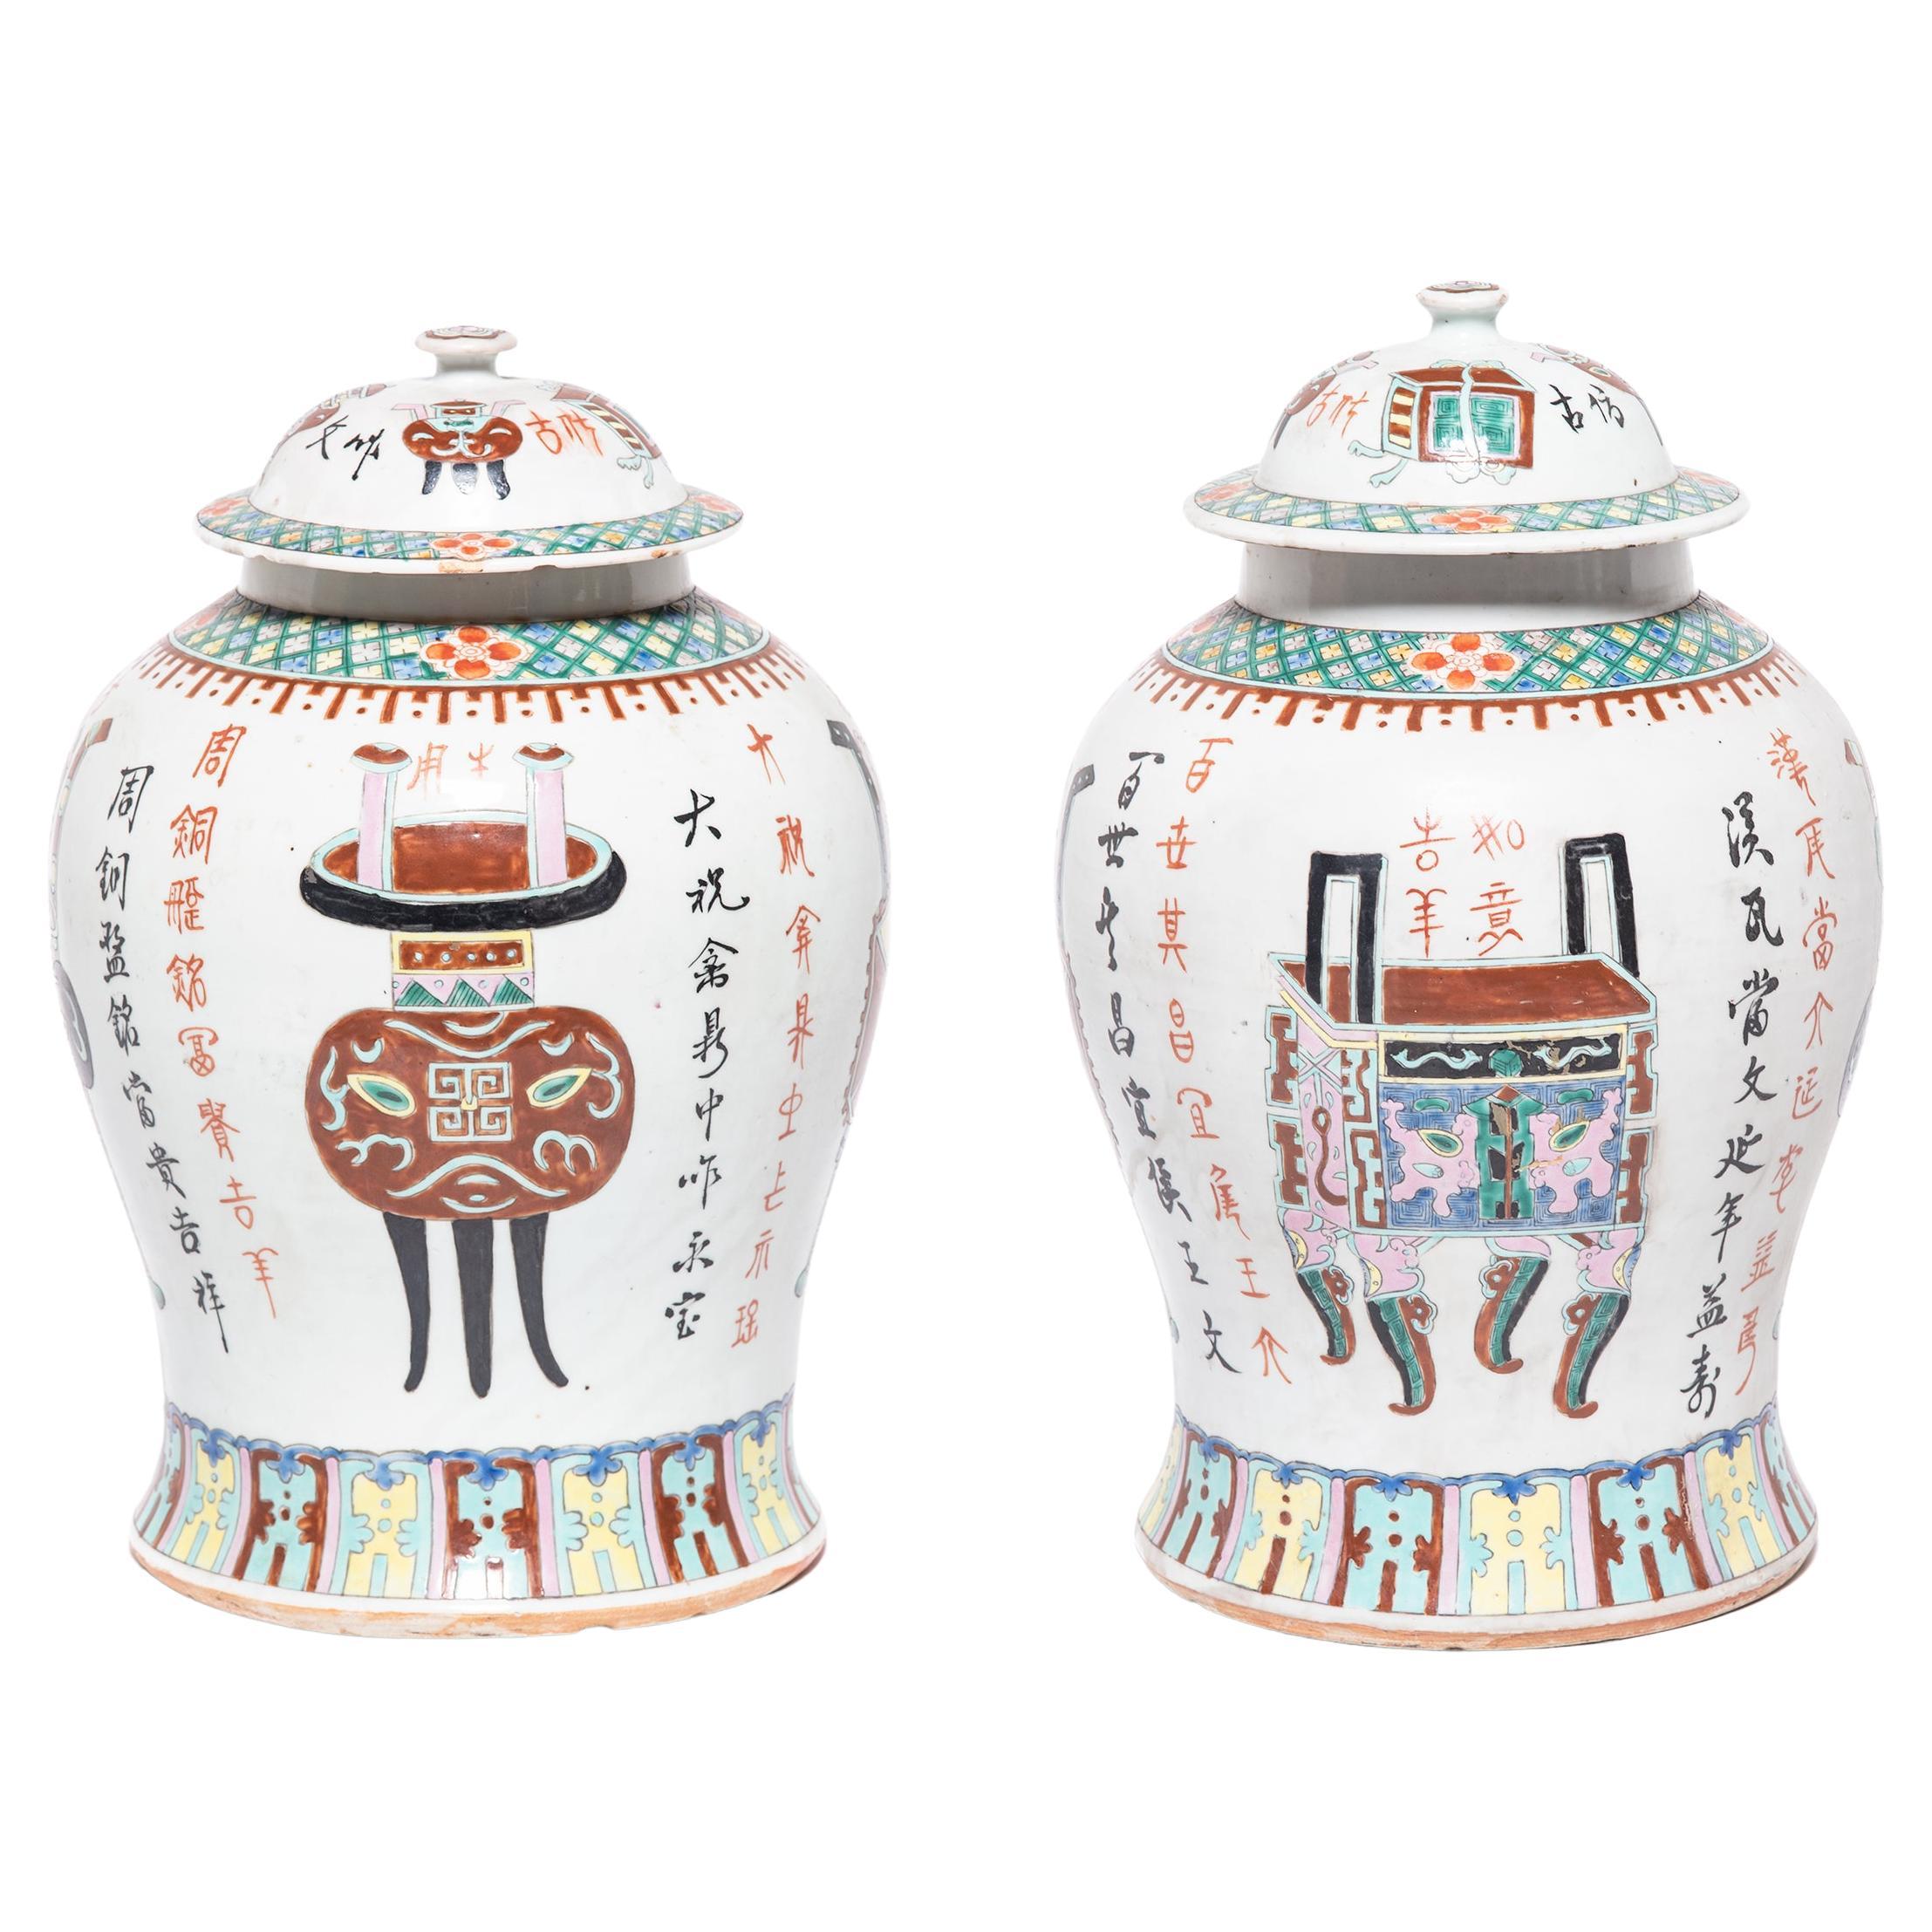 Pair of Chinese Famille Rose Baluster Jars with Ancient Censers, c. 1850